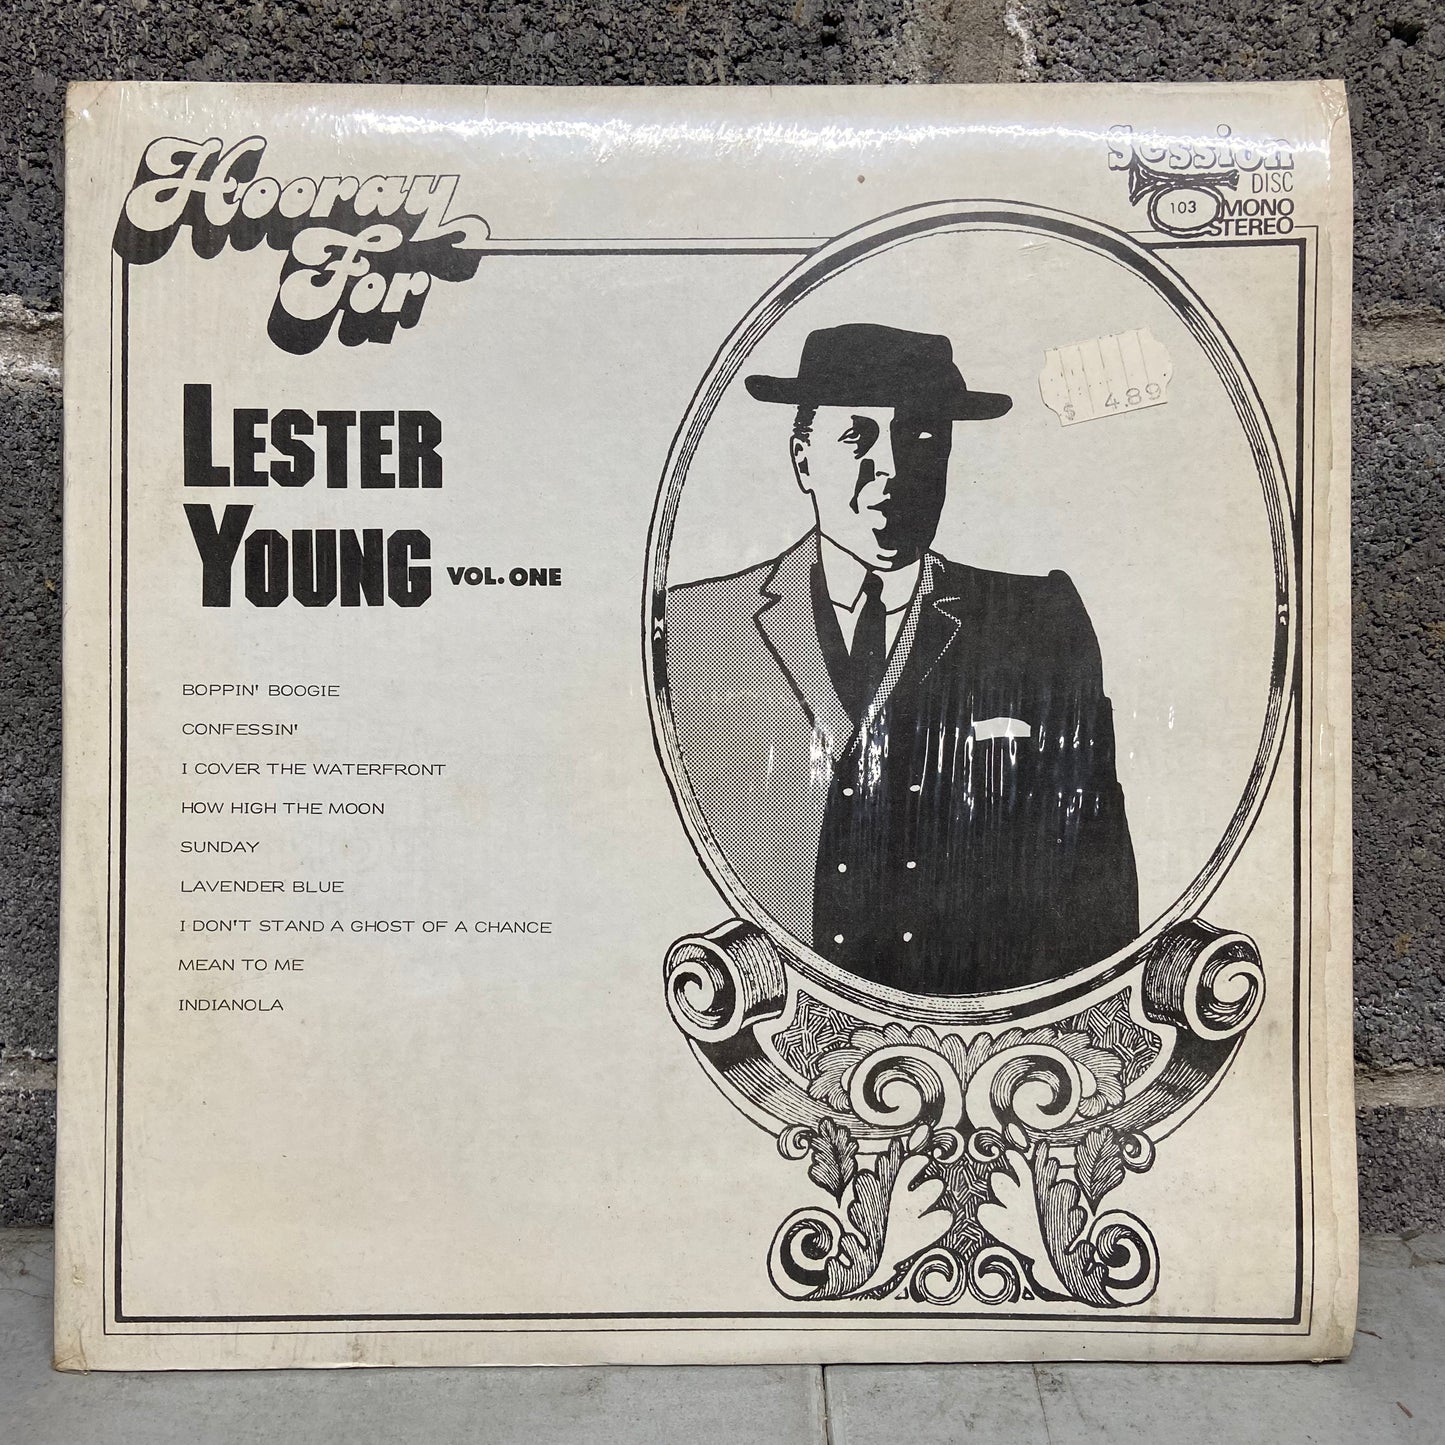 Hooray For Lester Young Vol. One